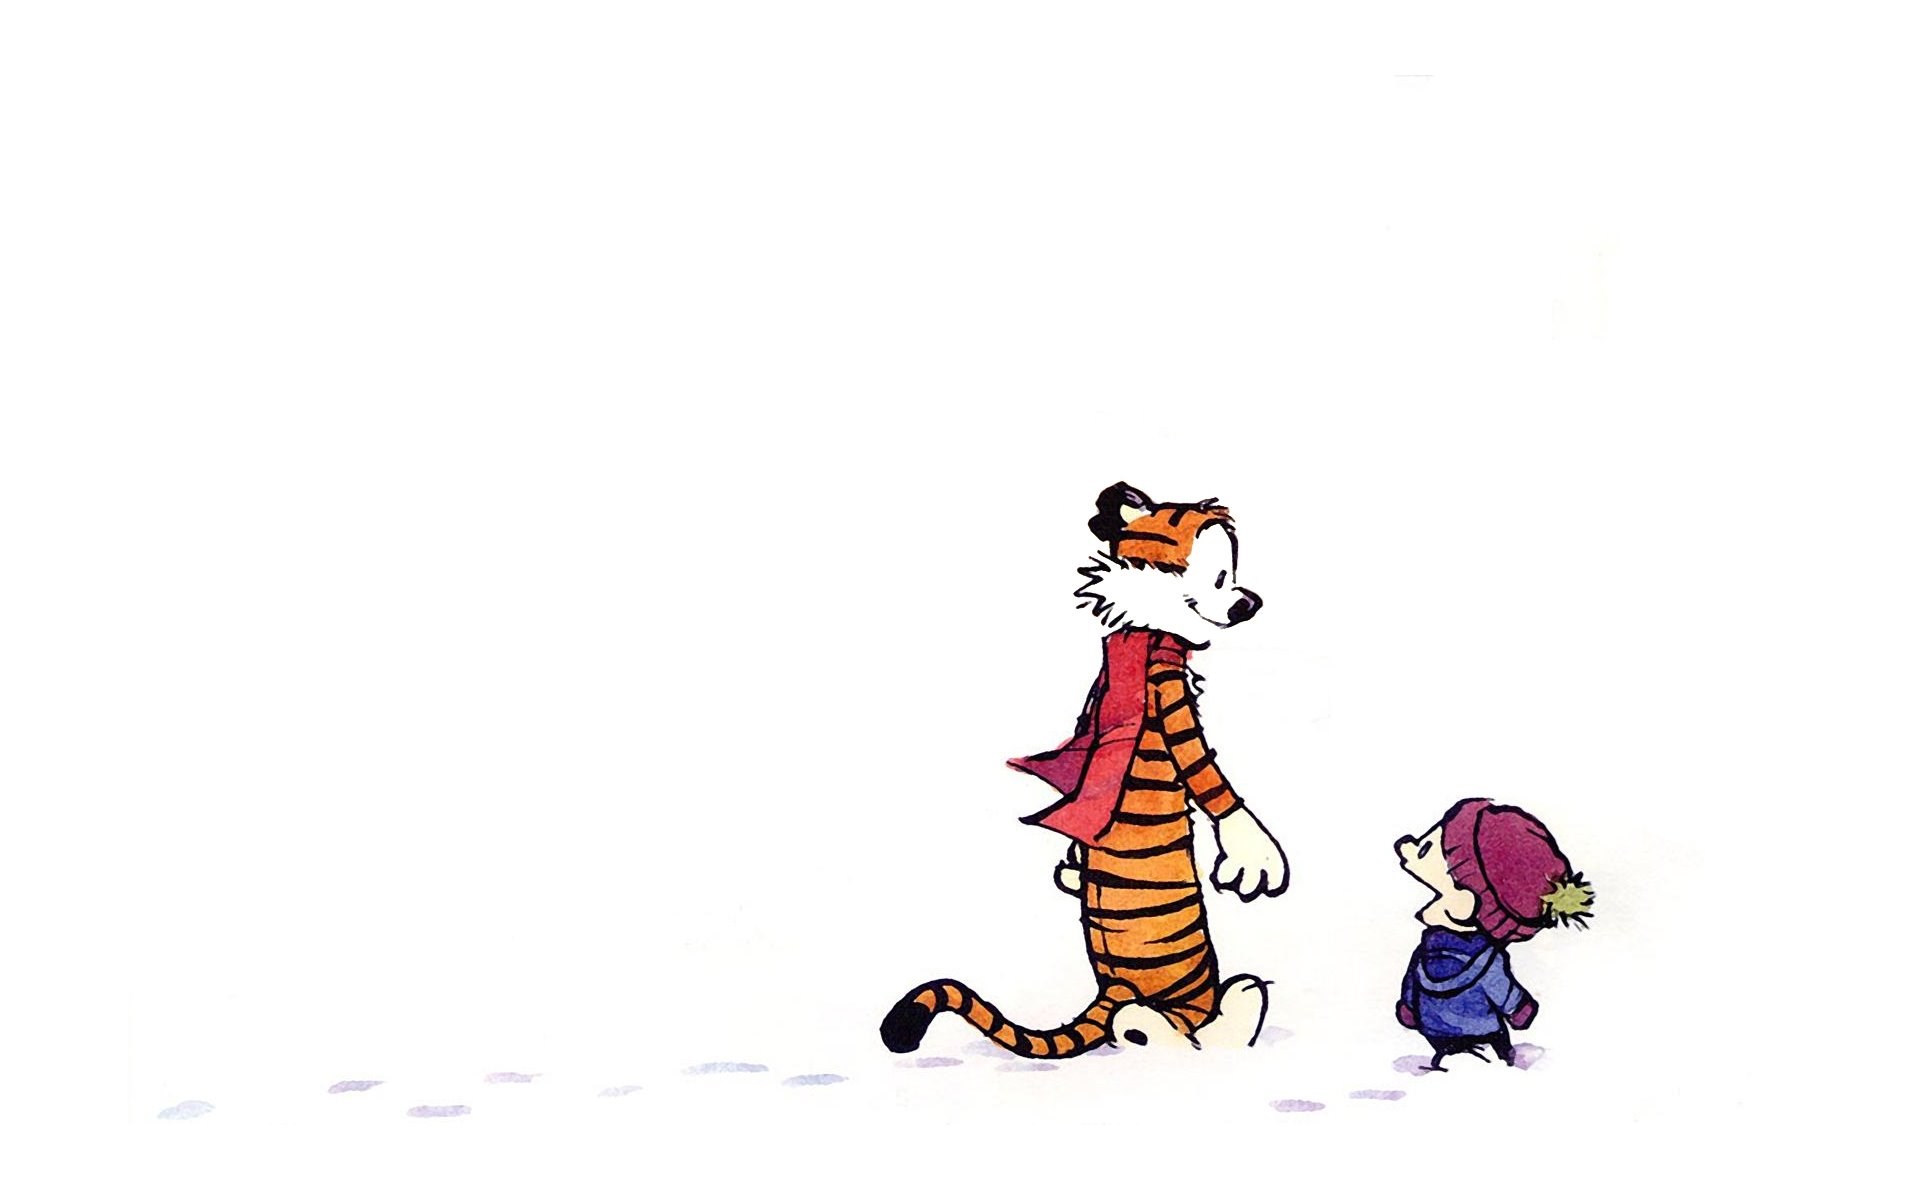 Download The Of Snow Calvin And Hobbes Scarf (id: 176587) - BUZZERG Popular...